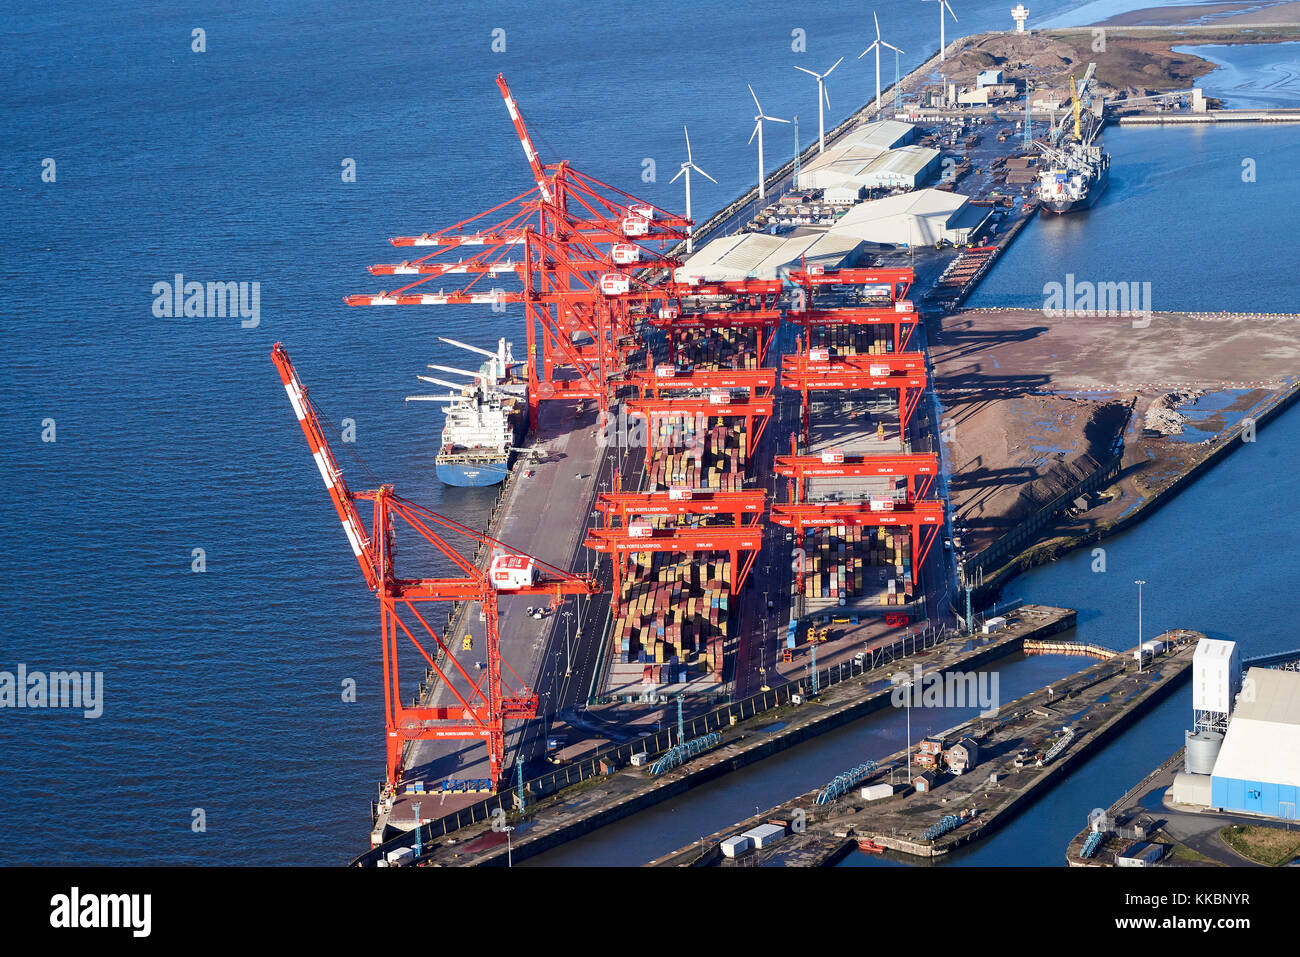 New Seaforth Dock container handling development, river Mersey. Liverpool, North West England, UK Stock Photo